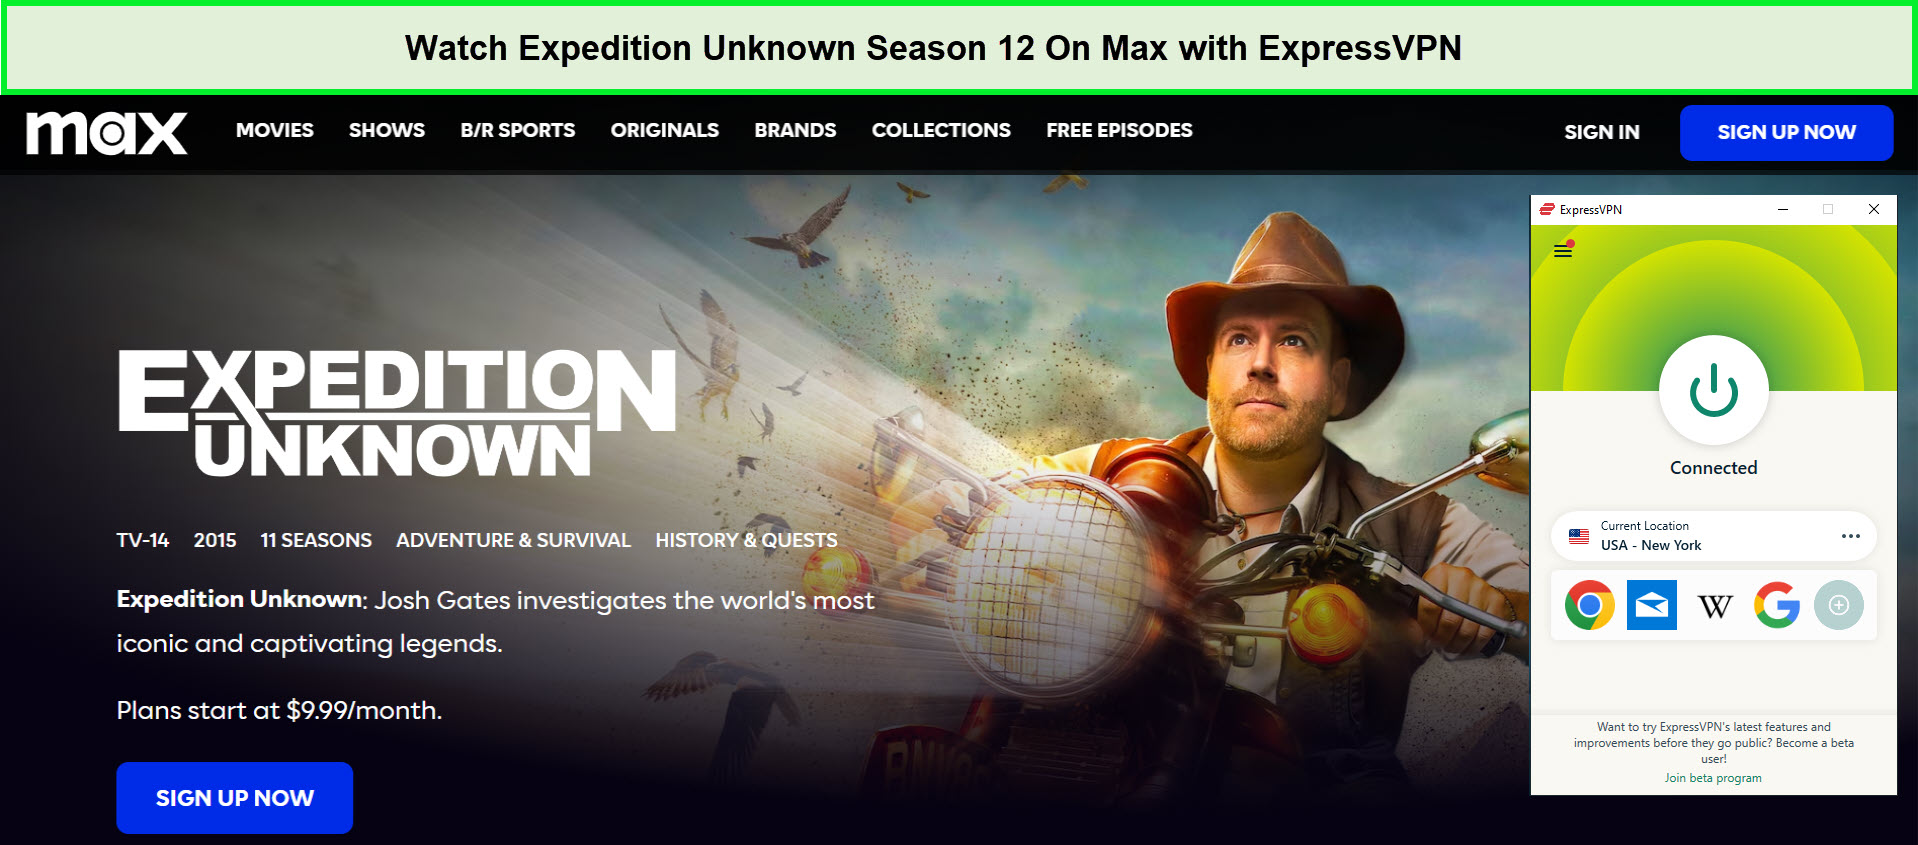 Watch-Expedition-Unknown-Season-12-in-Italy-On-Max-with-ExpressVPN